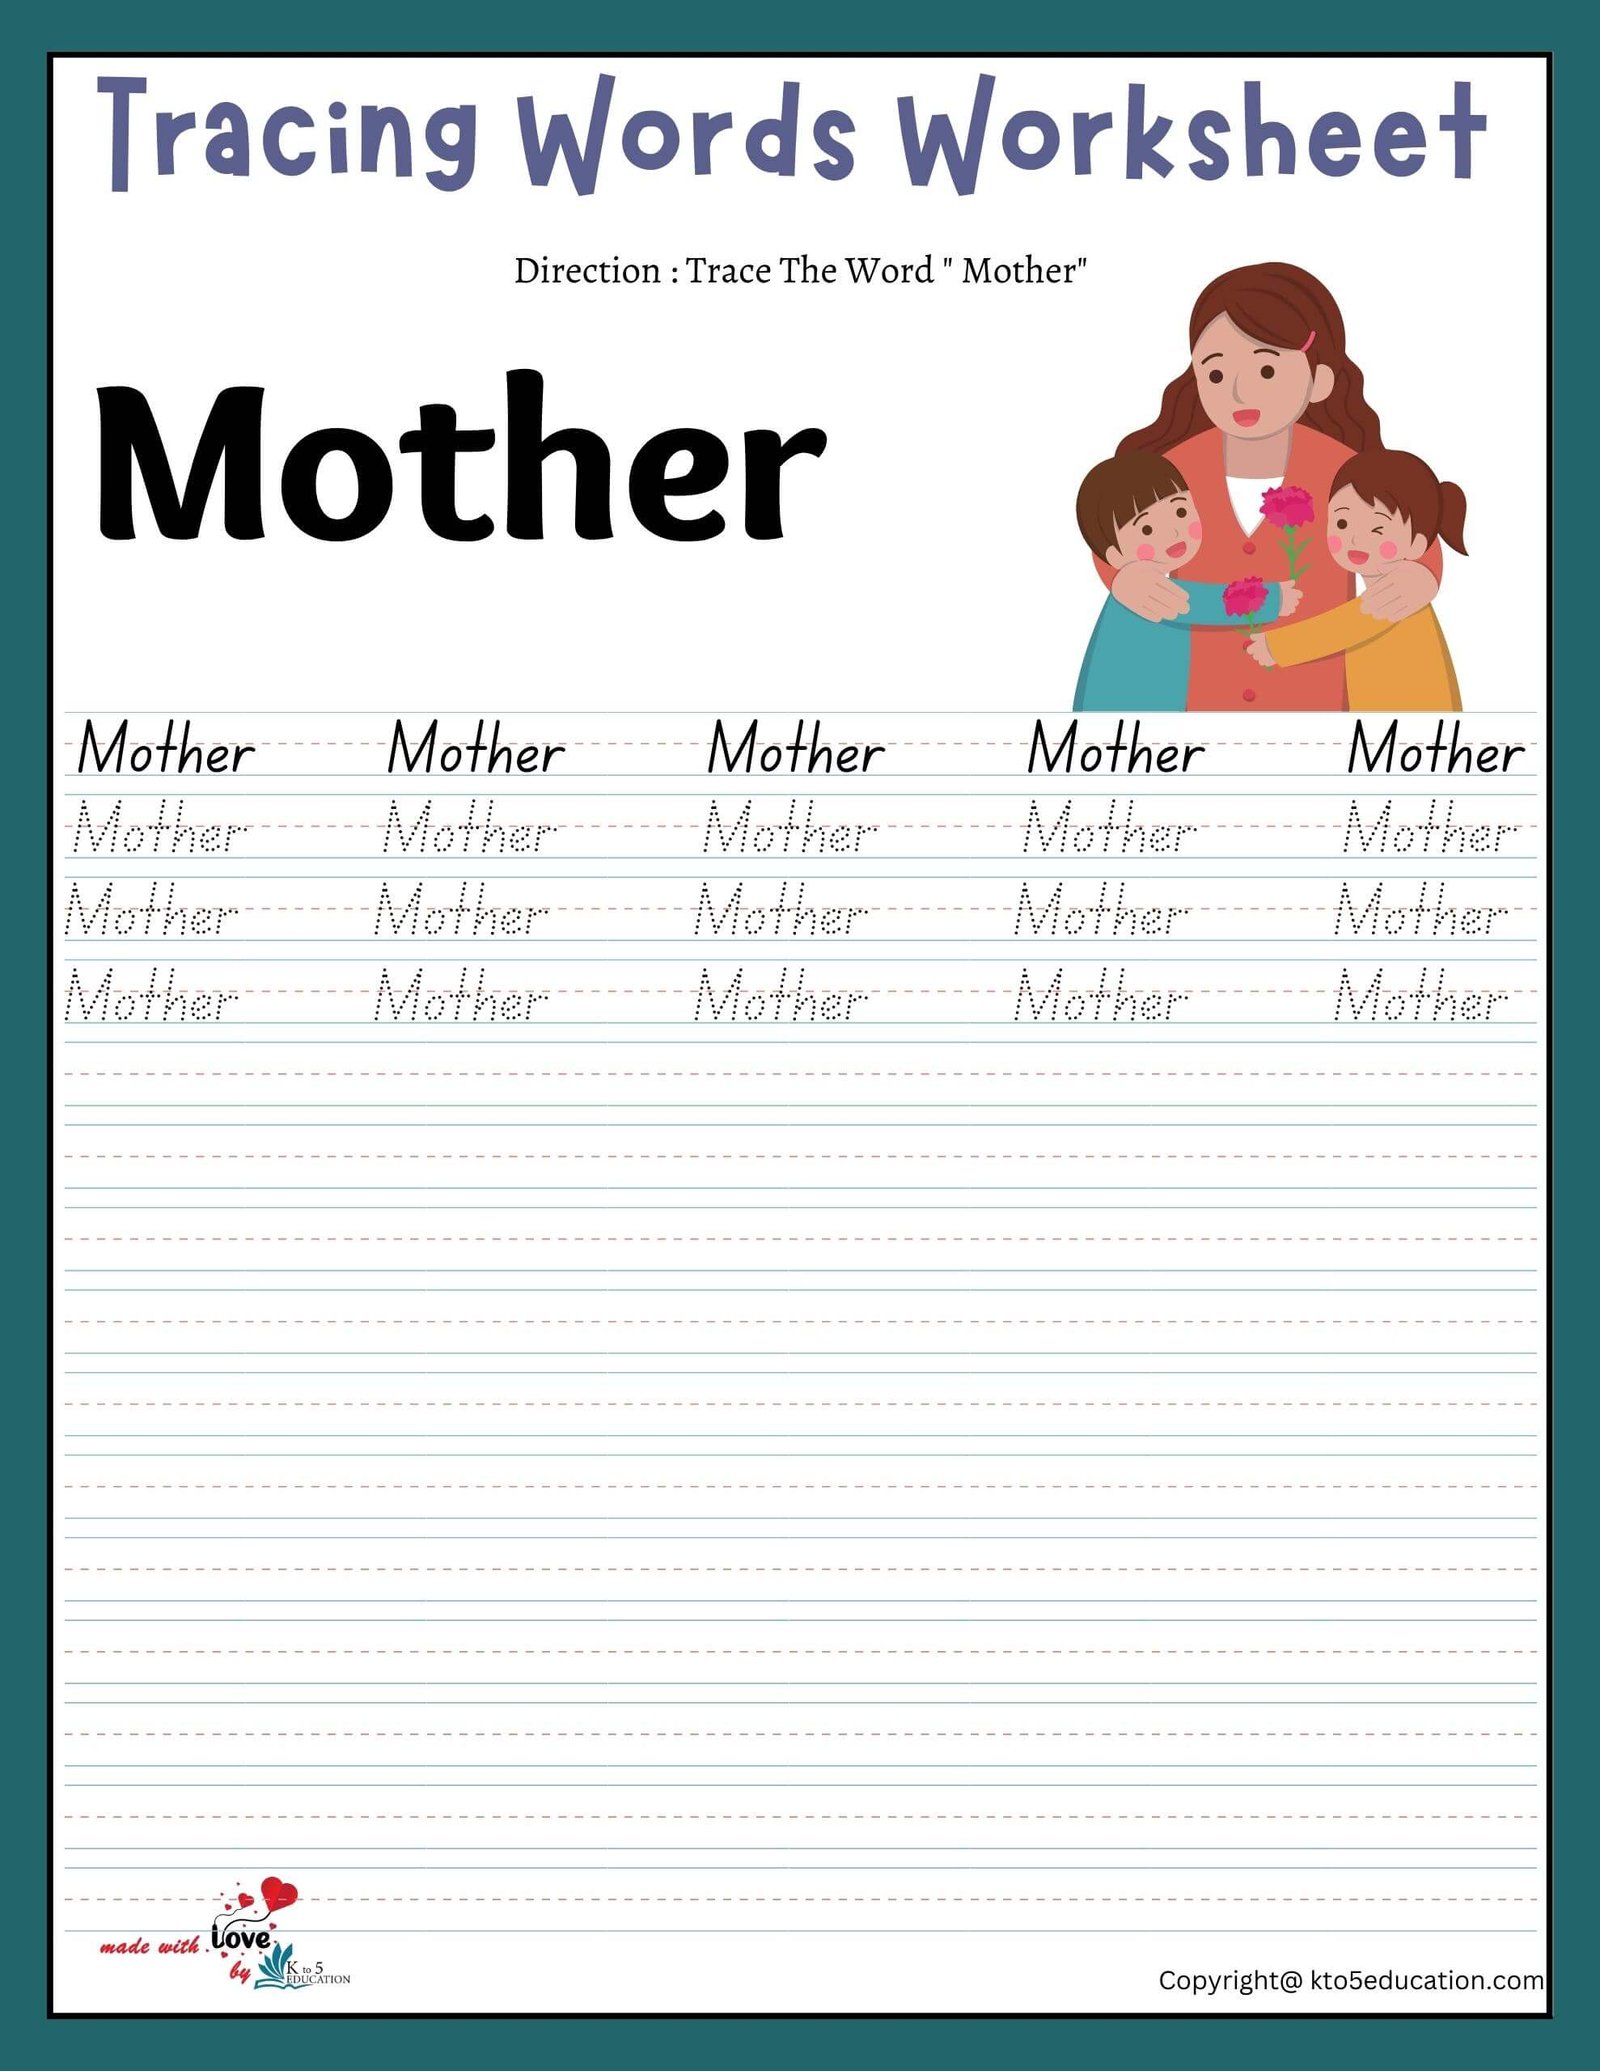 Family Tracing Words Worksheet Mother